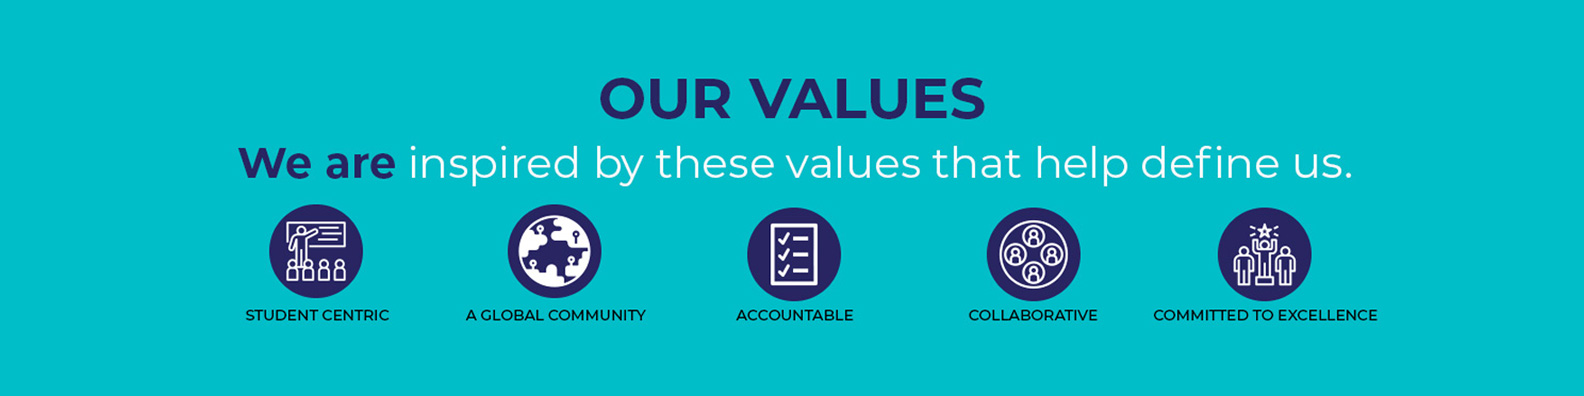 University Support Services | Our Values